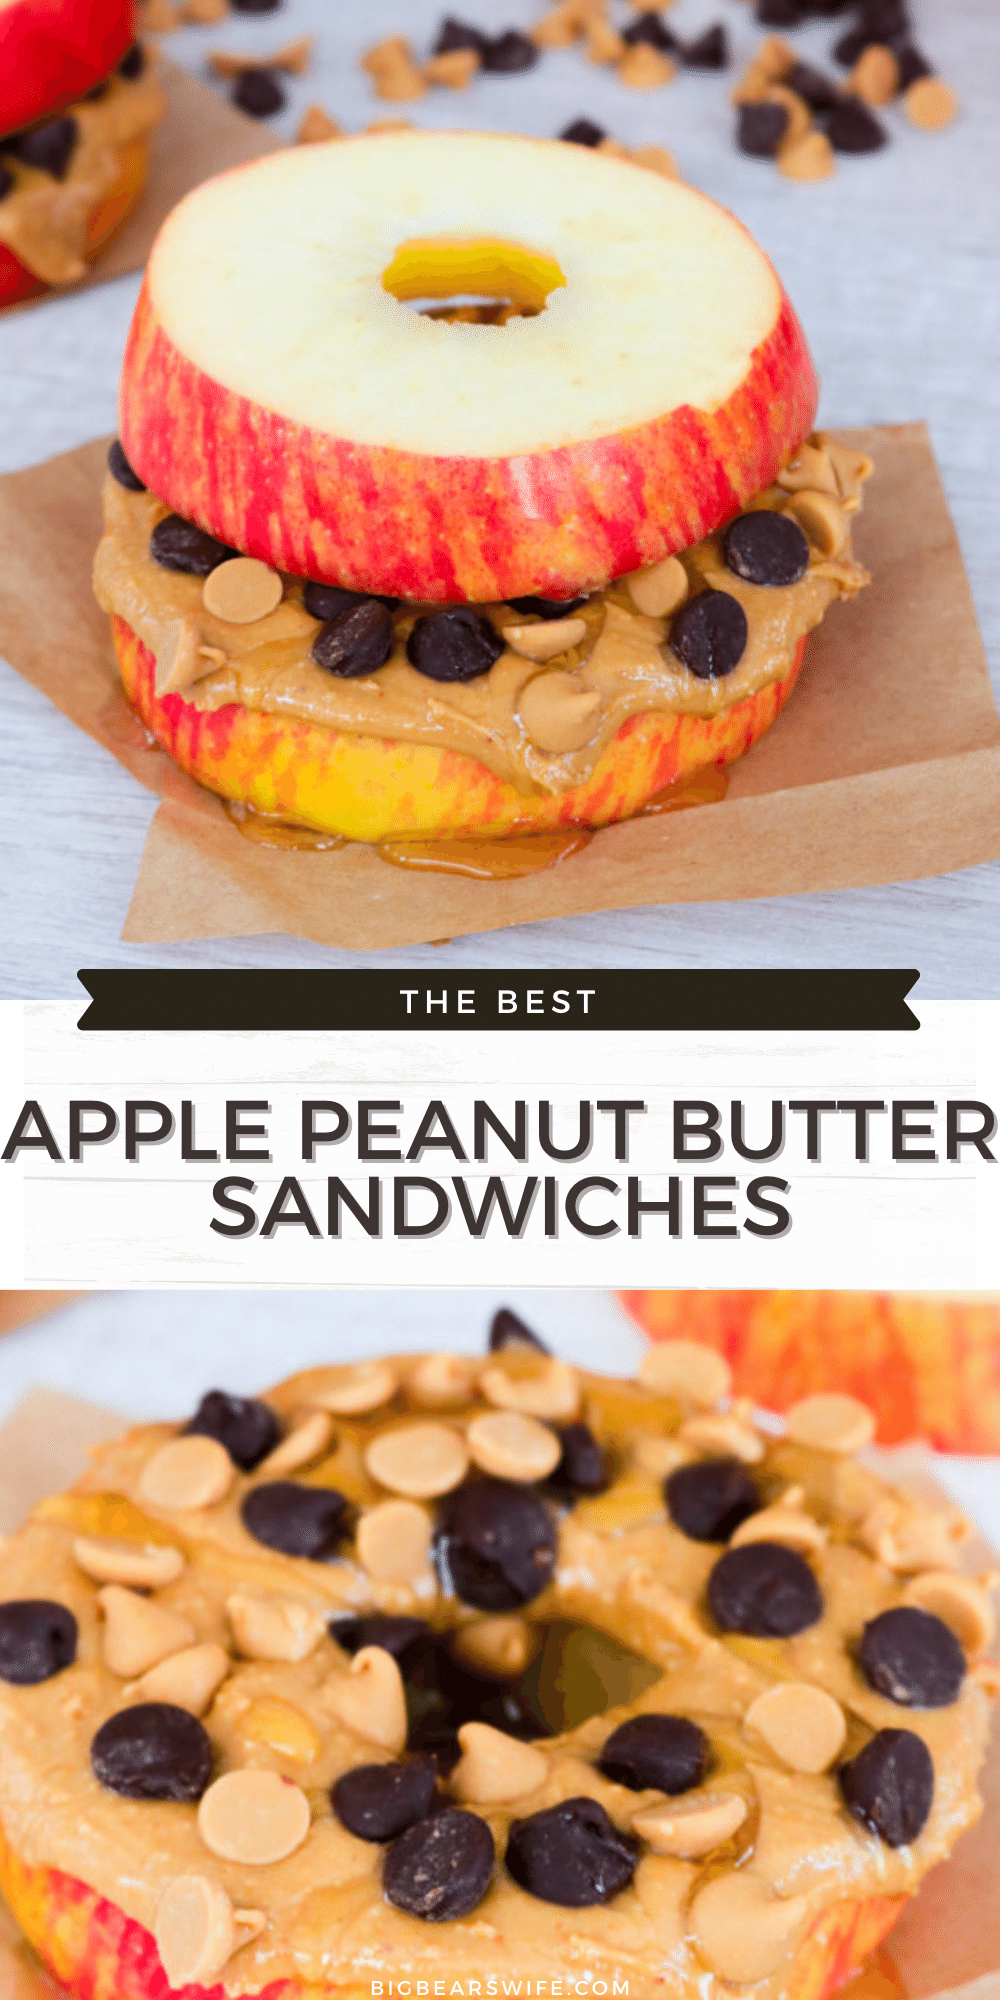 These Apple Peanut Butter Sandwiches are fun and easy to make! Eat these apple “sandwiches” with just peanut butter or add in all sorts of treats like chocolate chips, peanut butter chips, honey, oats, or raisins. via @bigbearswife